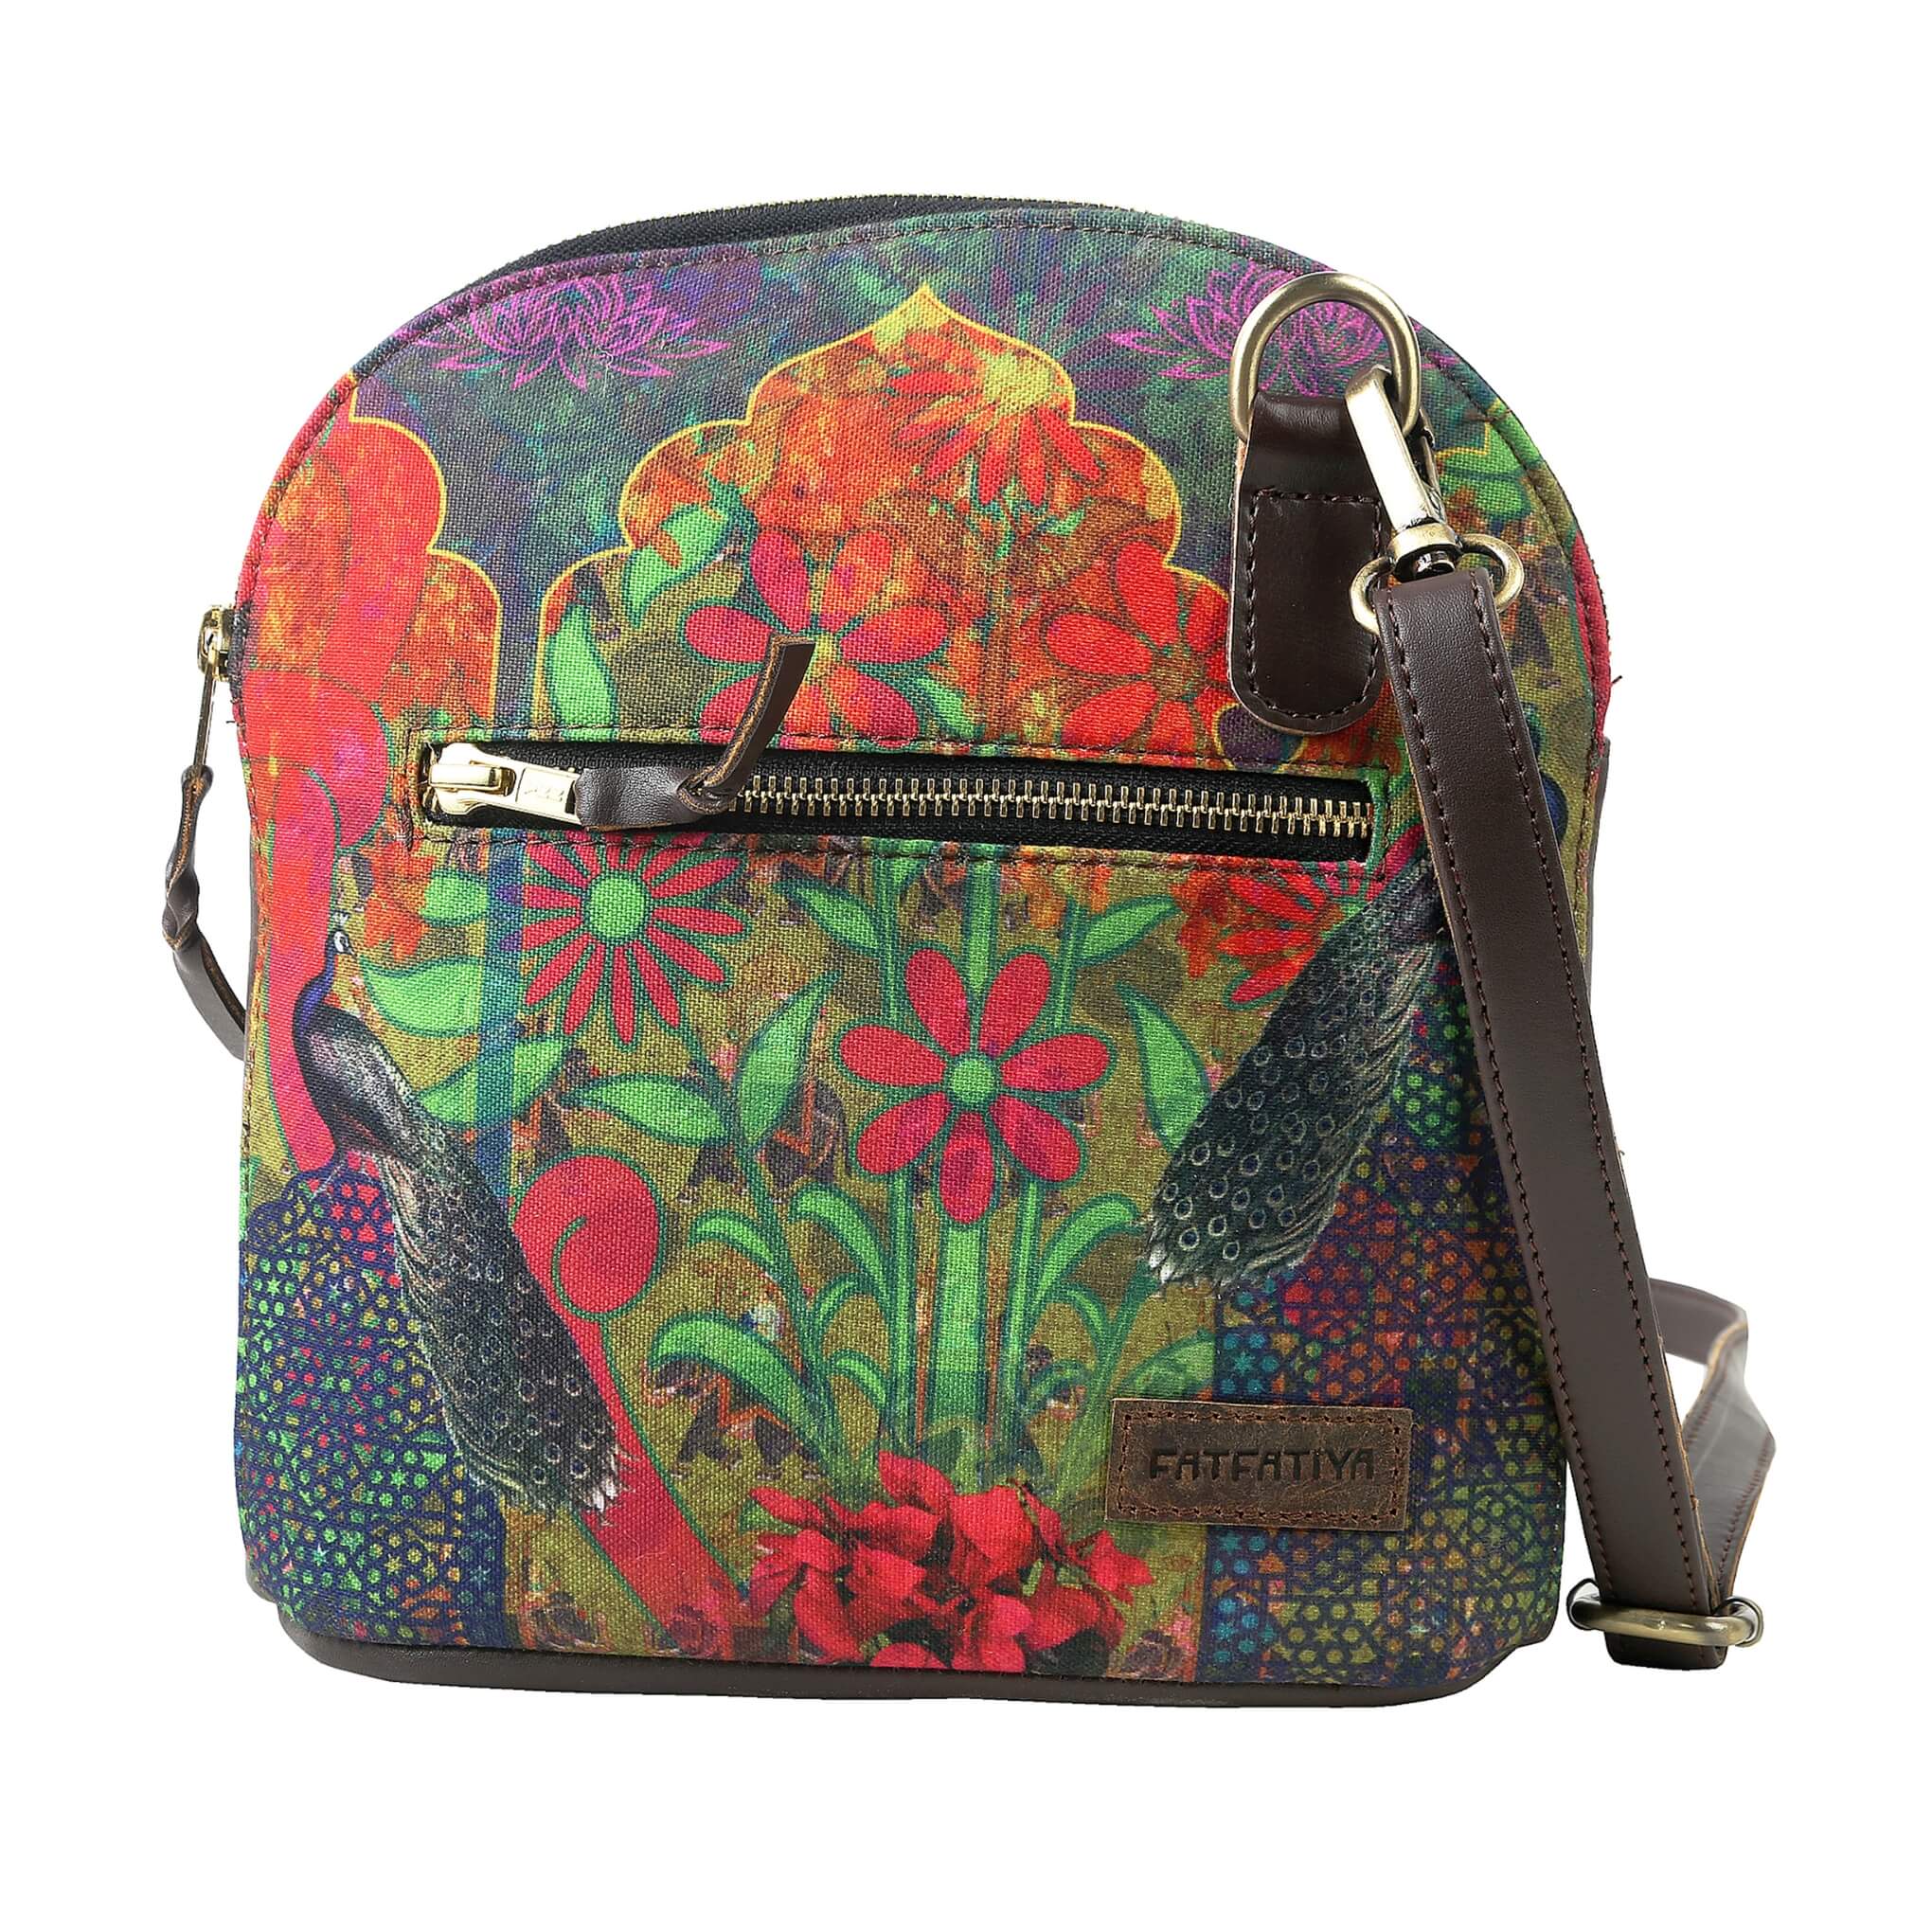 Two Peacock & Flower Small Sling Bag